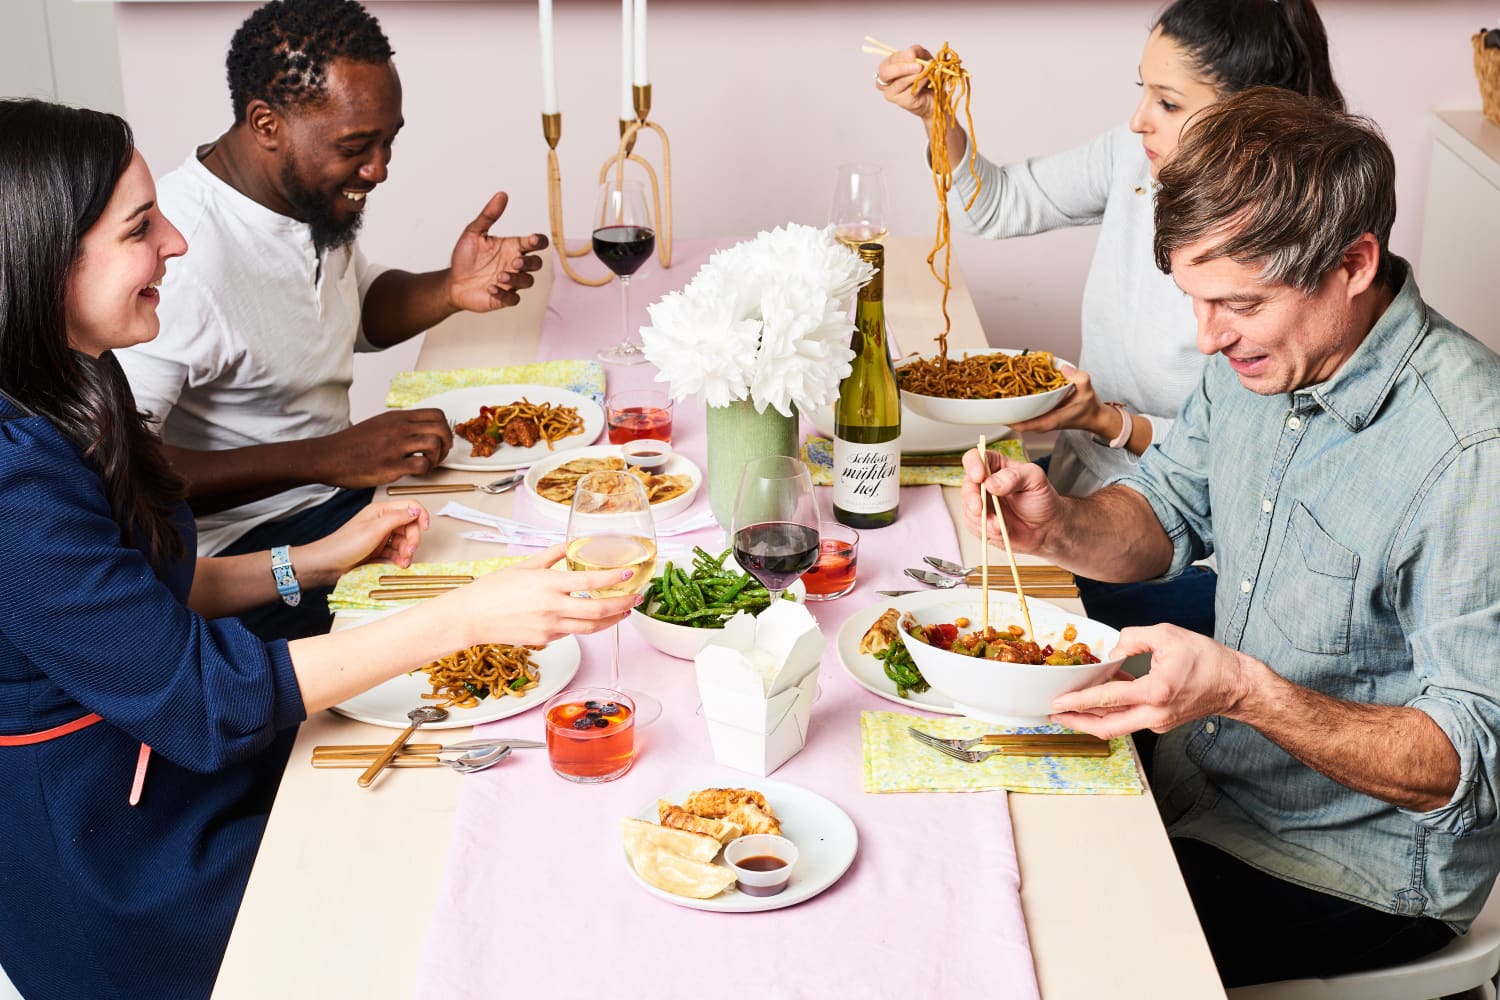 10 Tips for Hosting Thanksgiving: What I've Learned in the Past 5